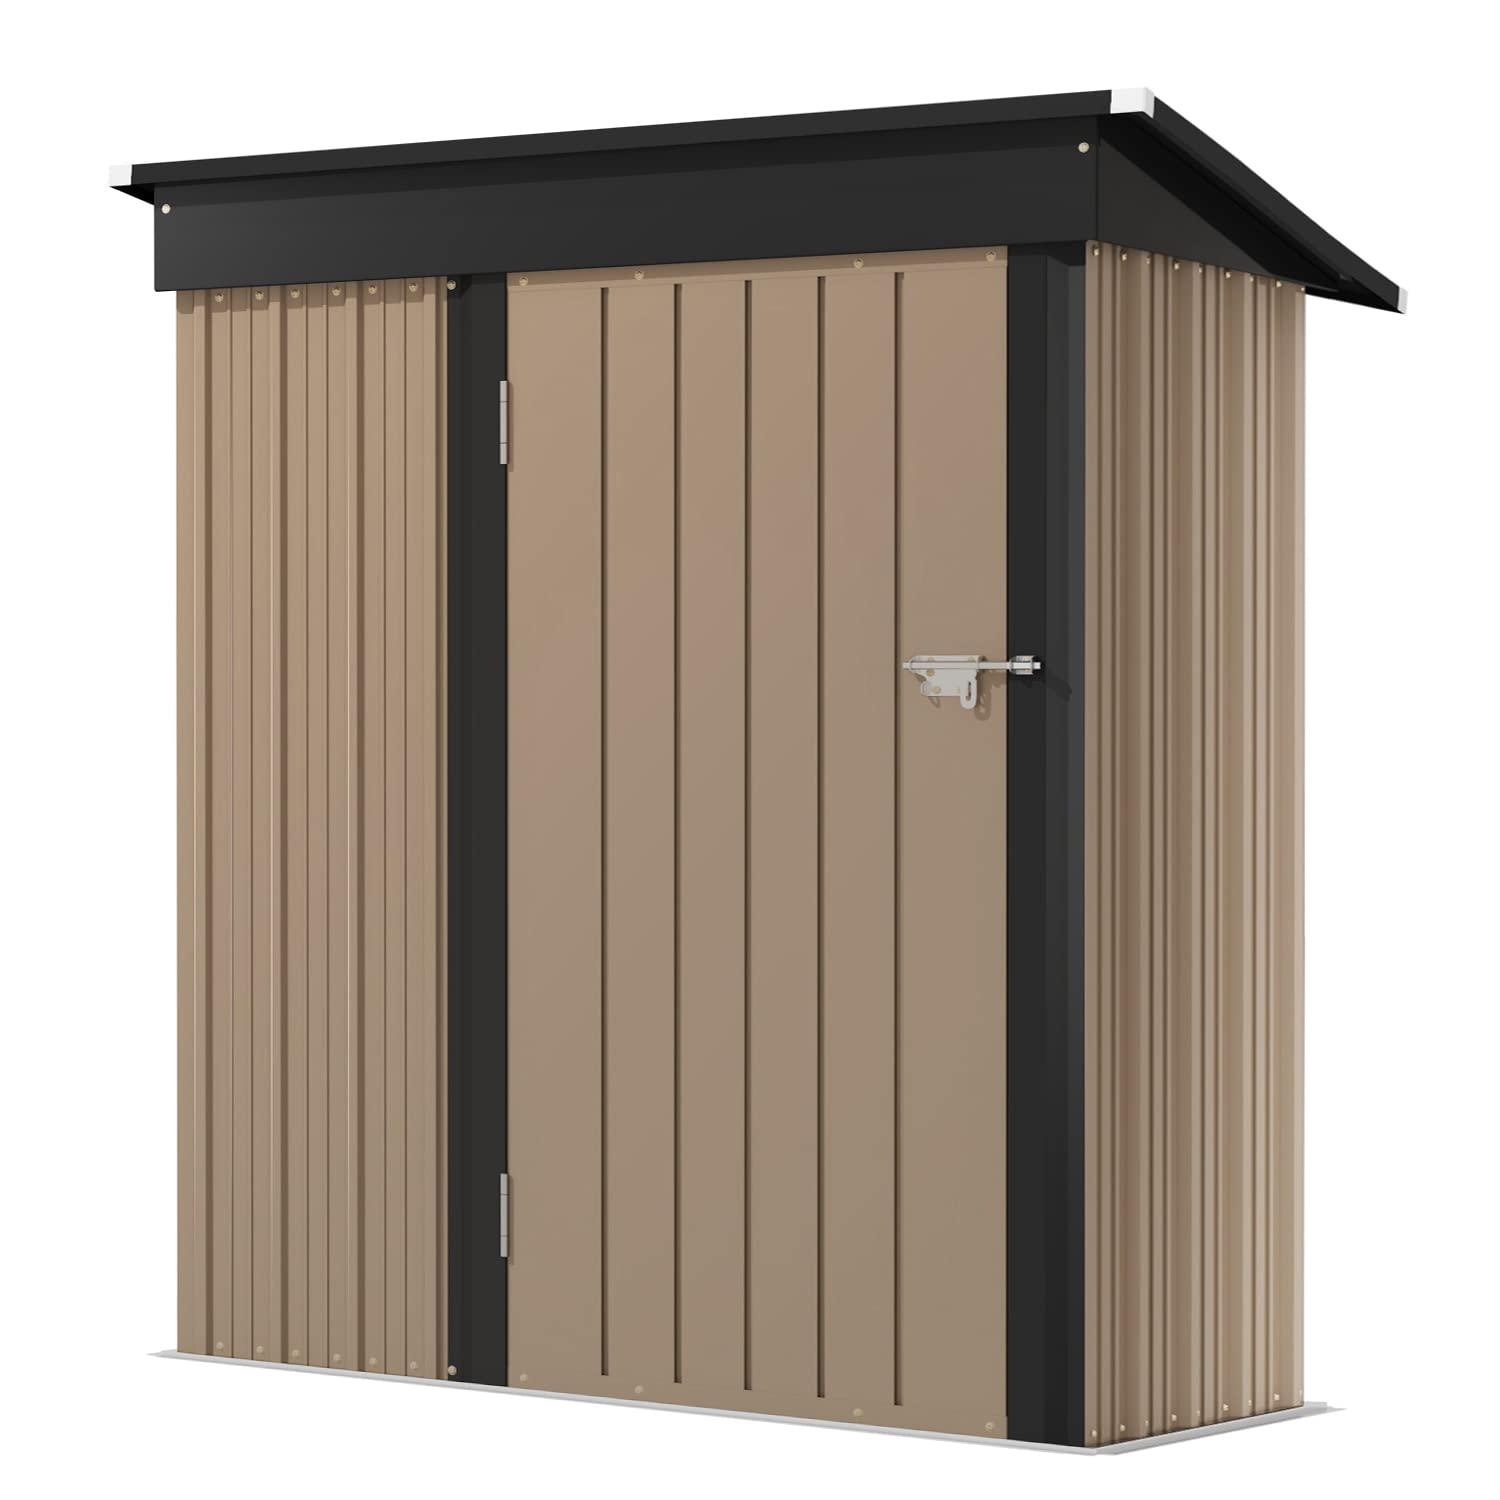 Devoko Outdoor Storage Shed 5 x 3 FT Lockable Metal Garden Shed Steel Anti-Corrosion Storage House with Single Lockable Door for Backyard Outdoor Patio (Brown) - CookCave